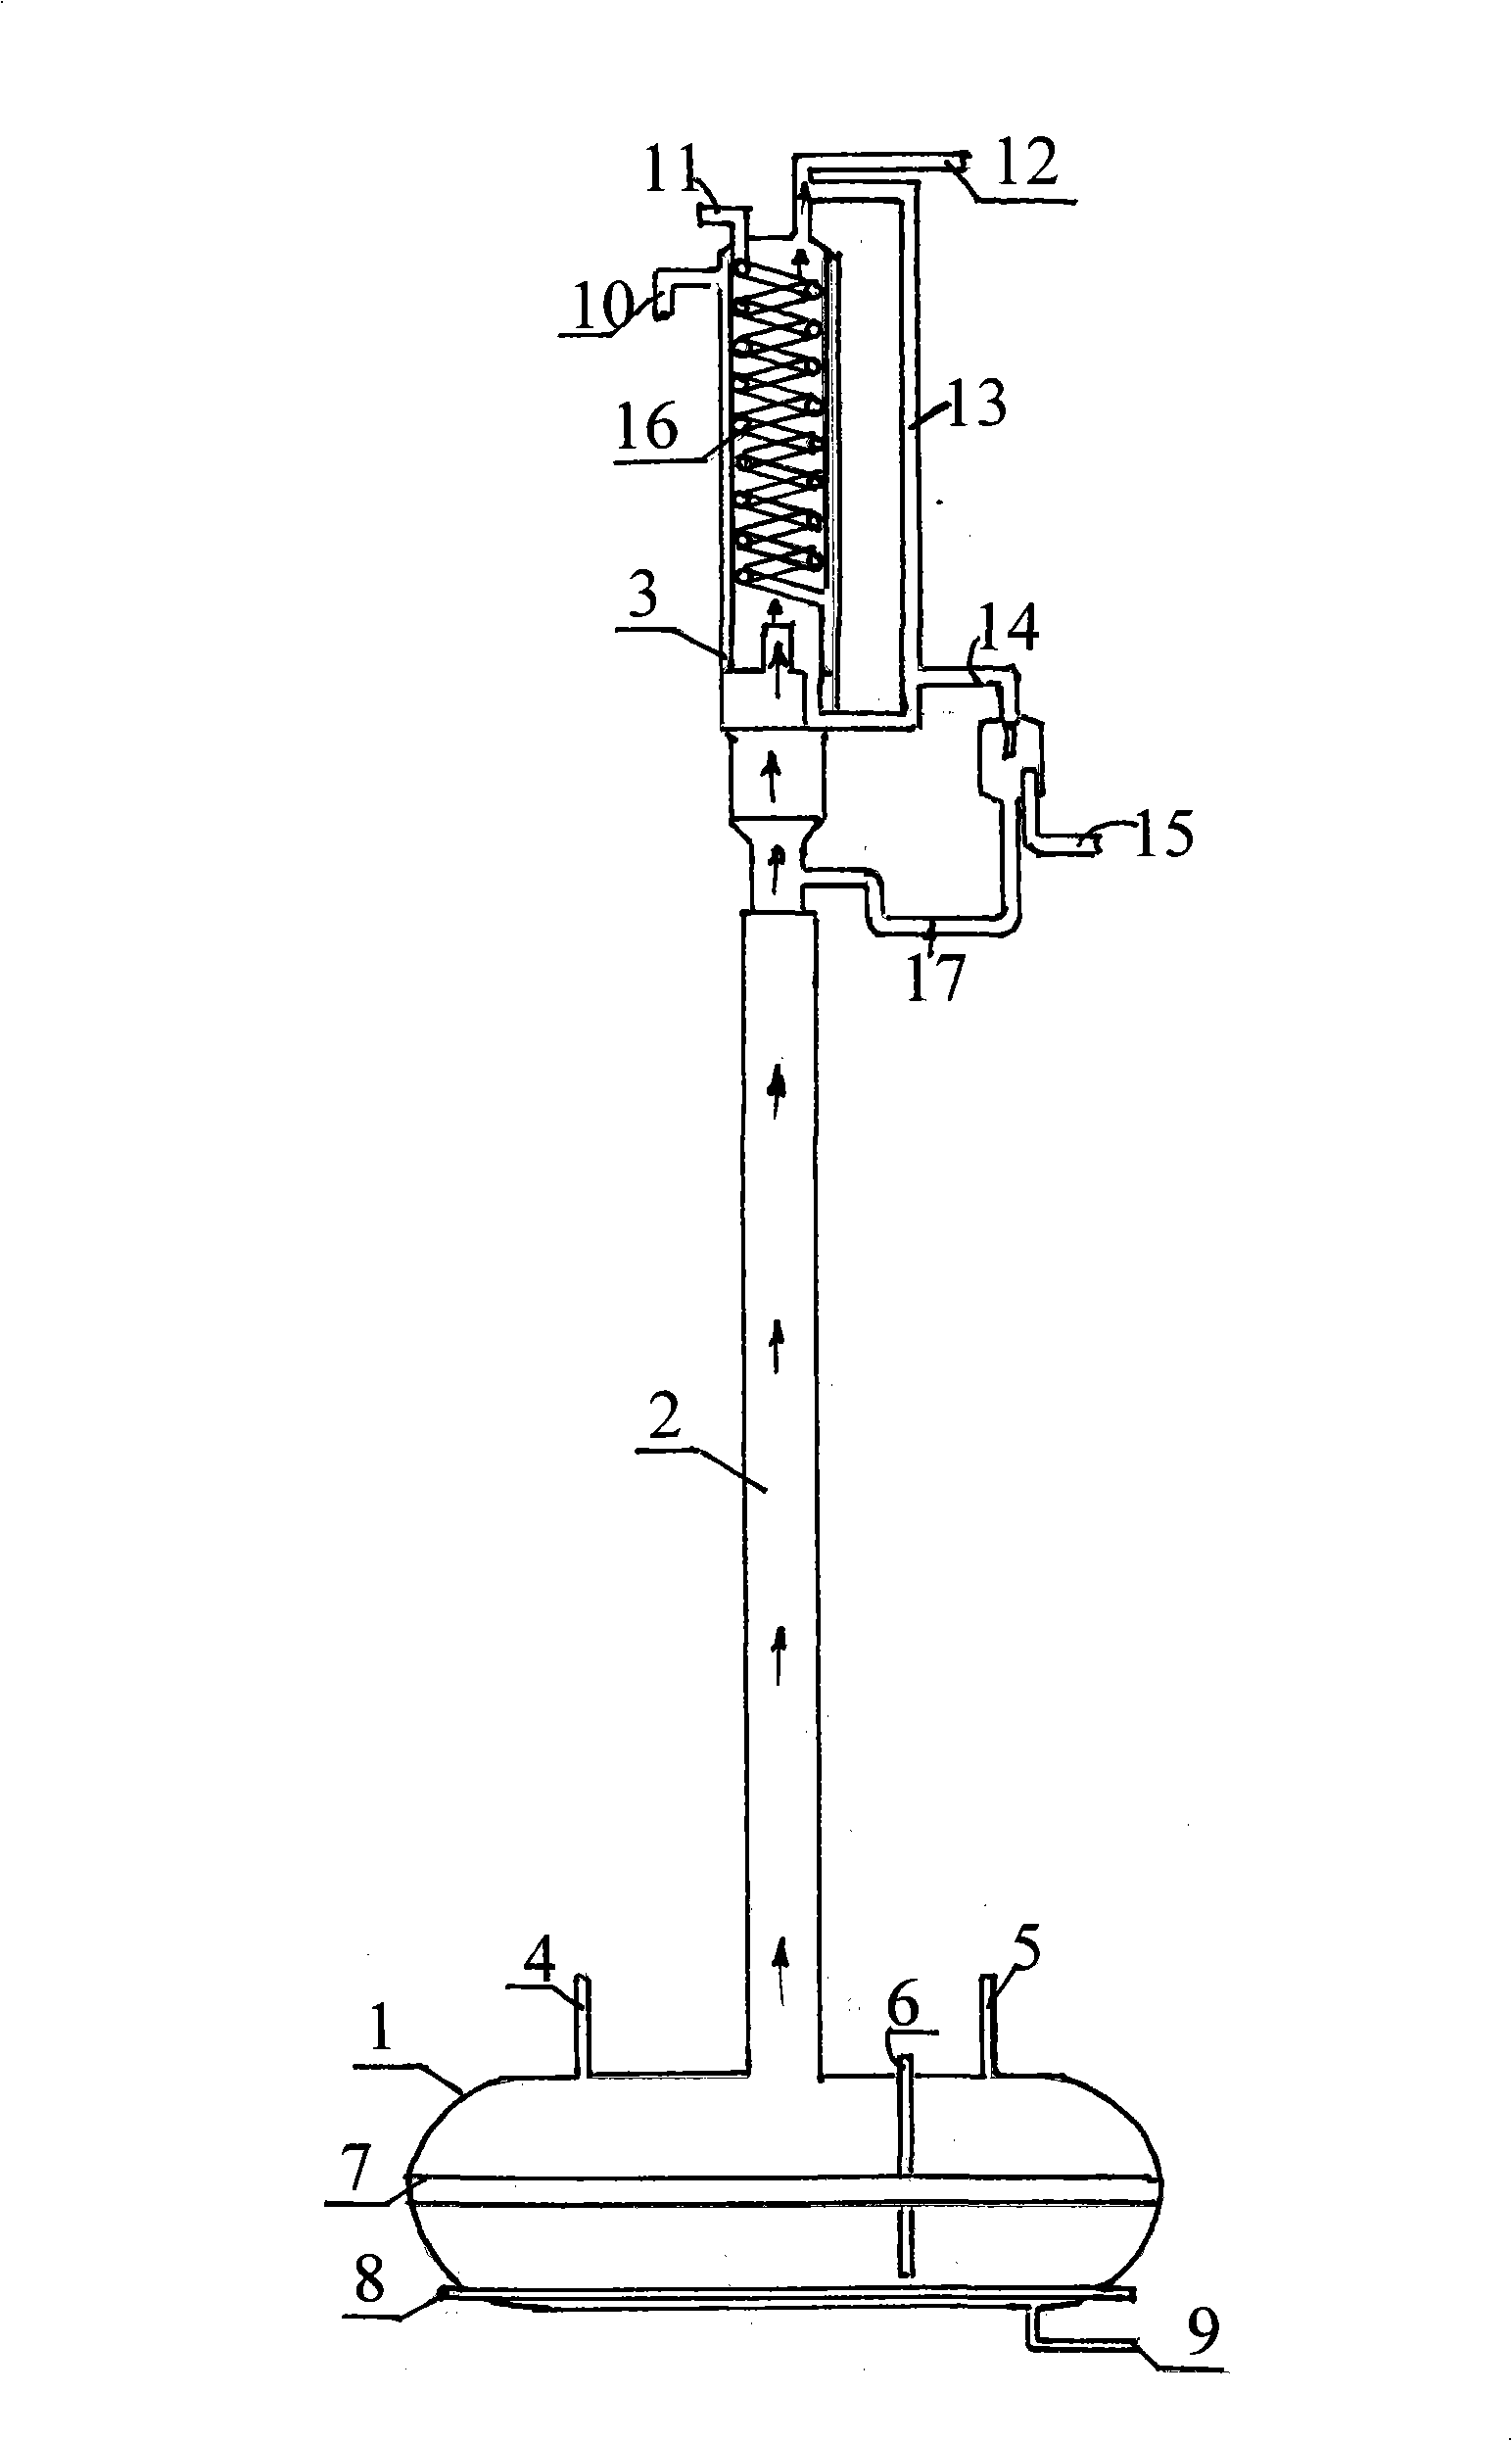 Rectification column for removing hydrogen containing foreign matter in germanic chloride